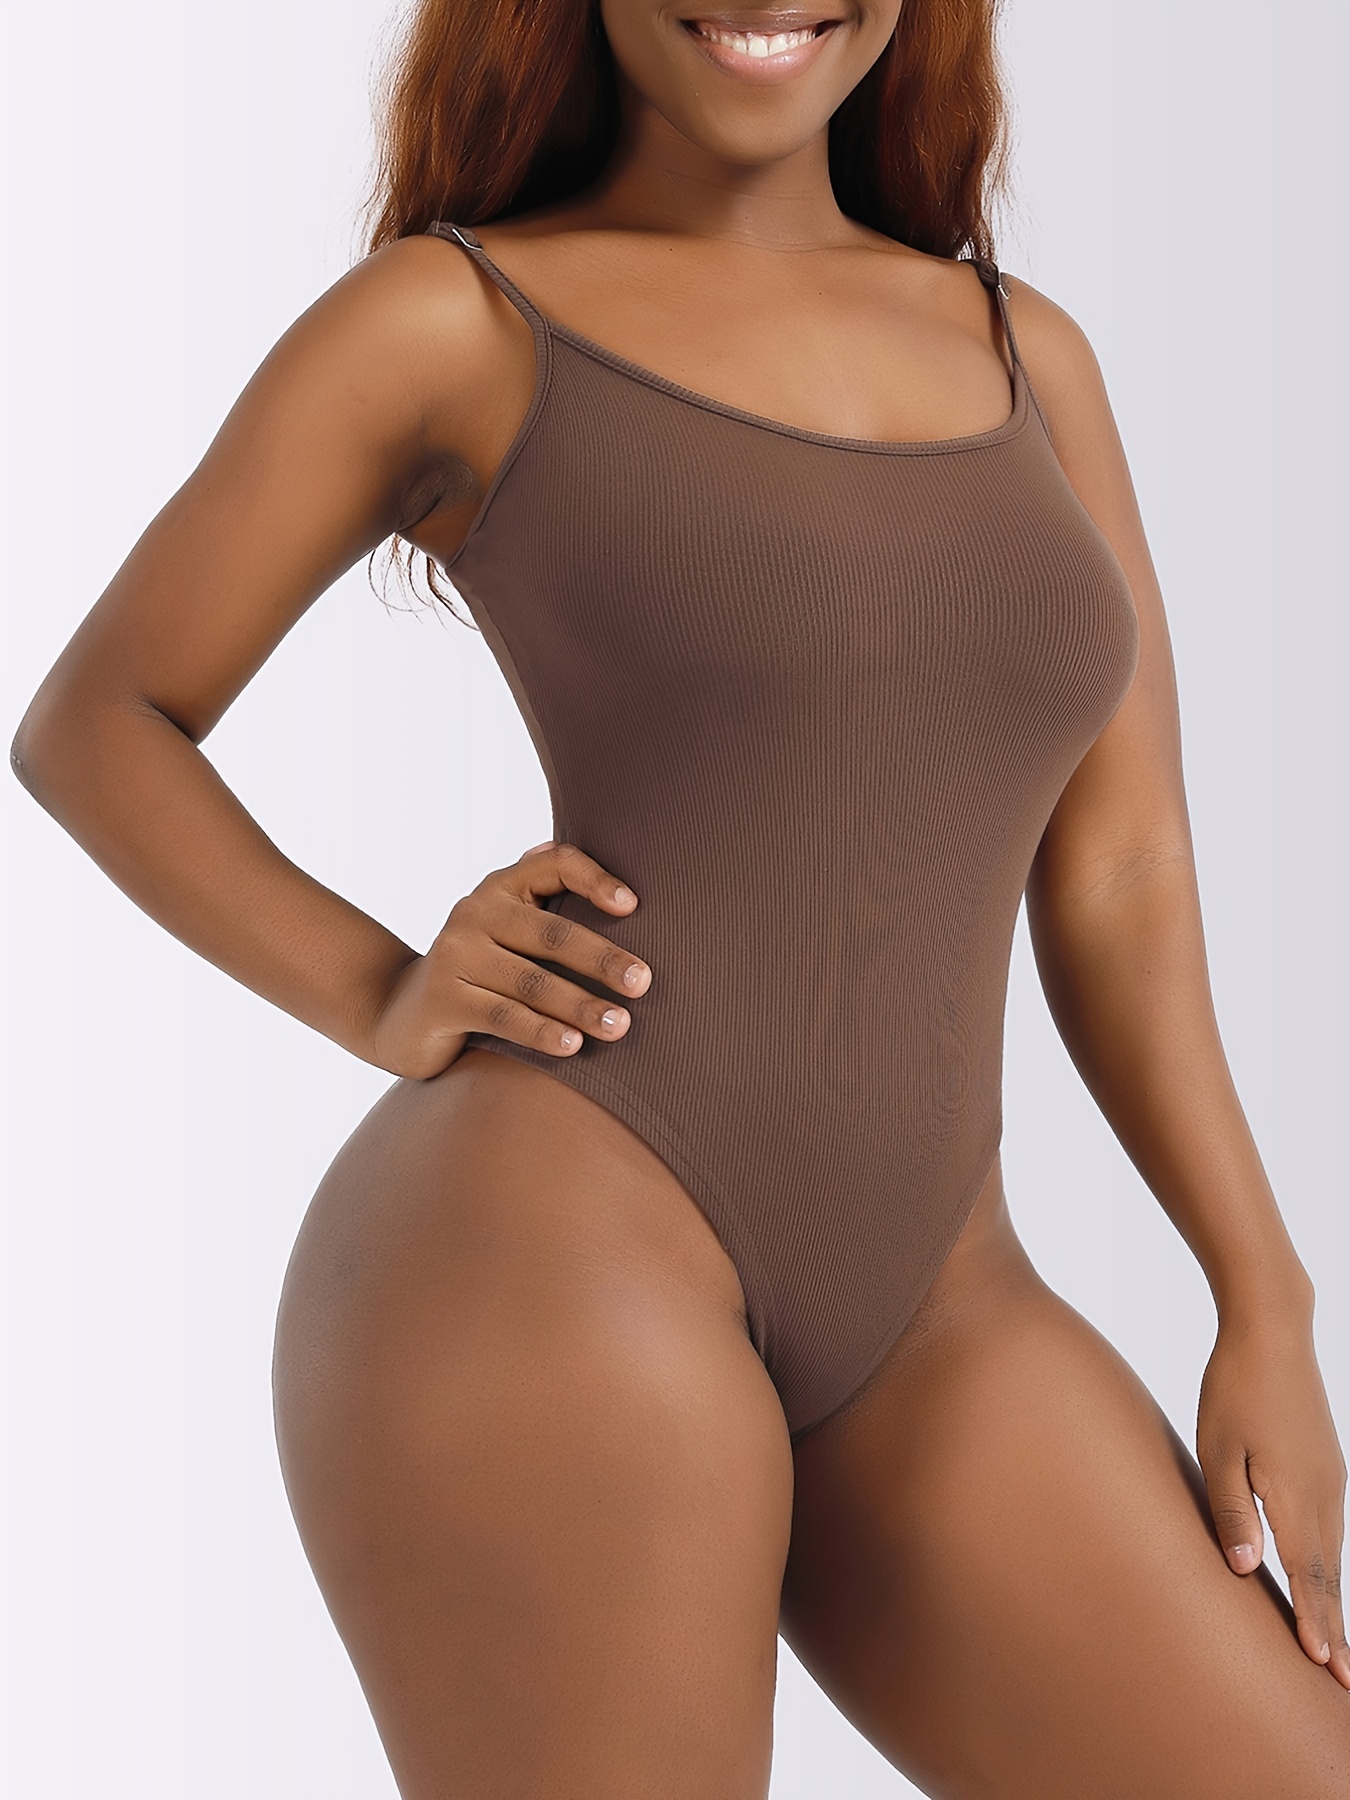 Strapless Shaping Bodysuit Tummy Control Slimming Thong Body